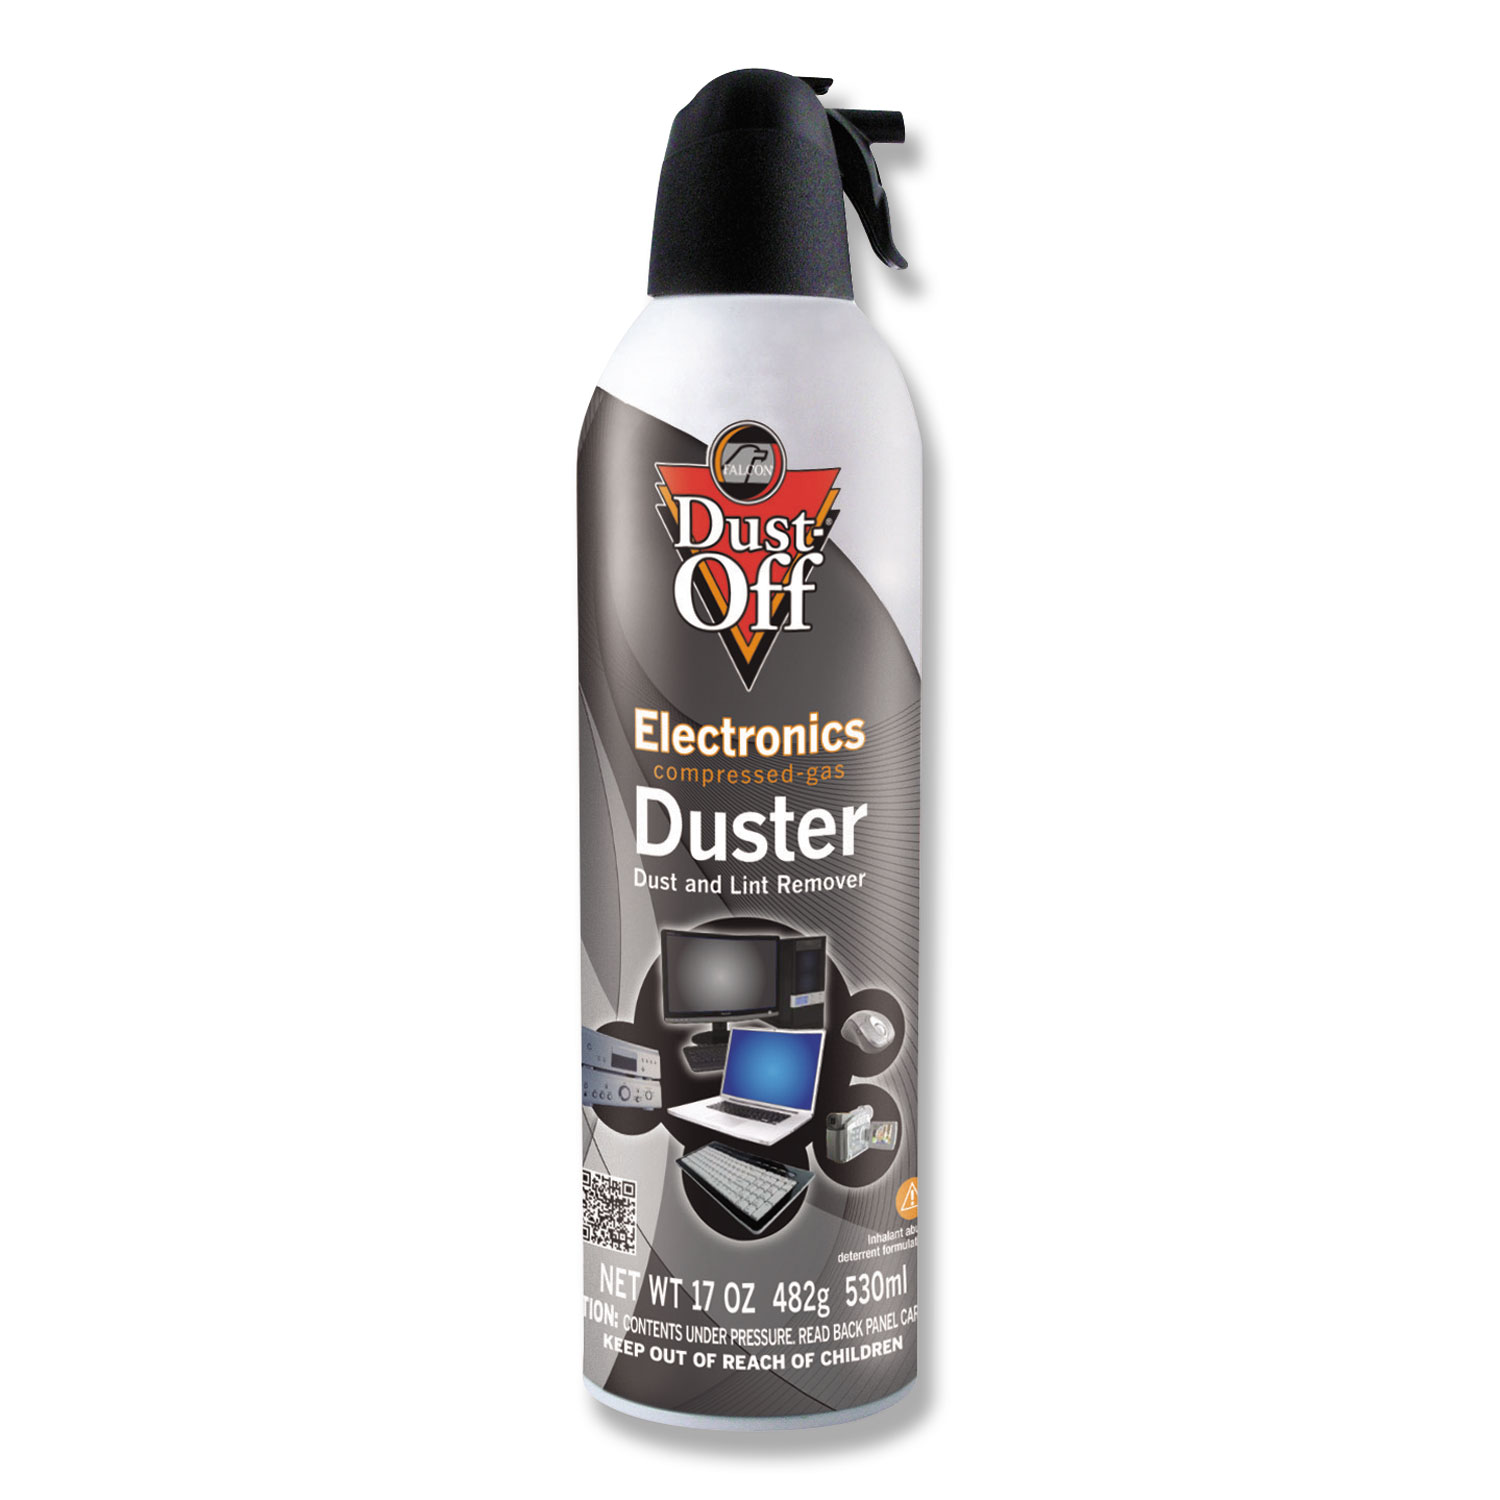 Office Depot Brand Cleaning Duster 10 Oz Pack Of 6 Cans - Office Depot